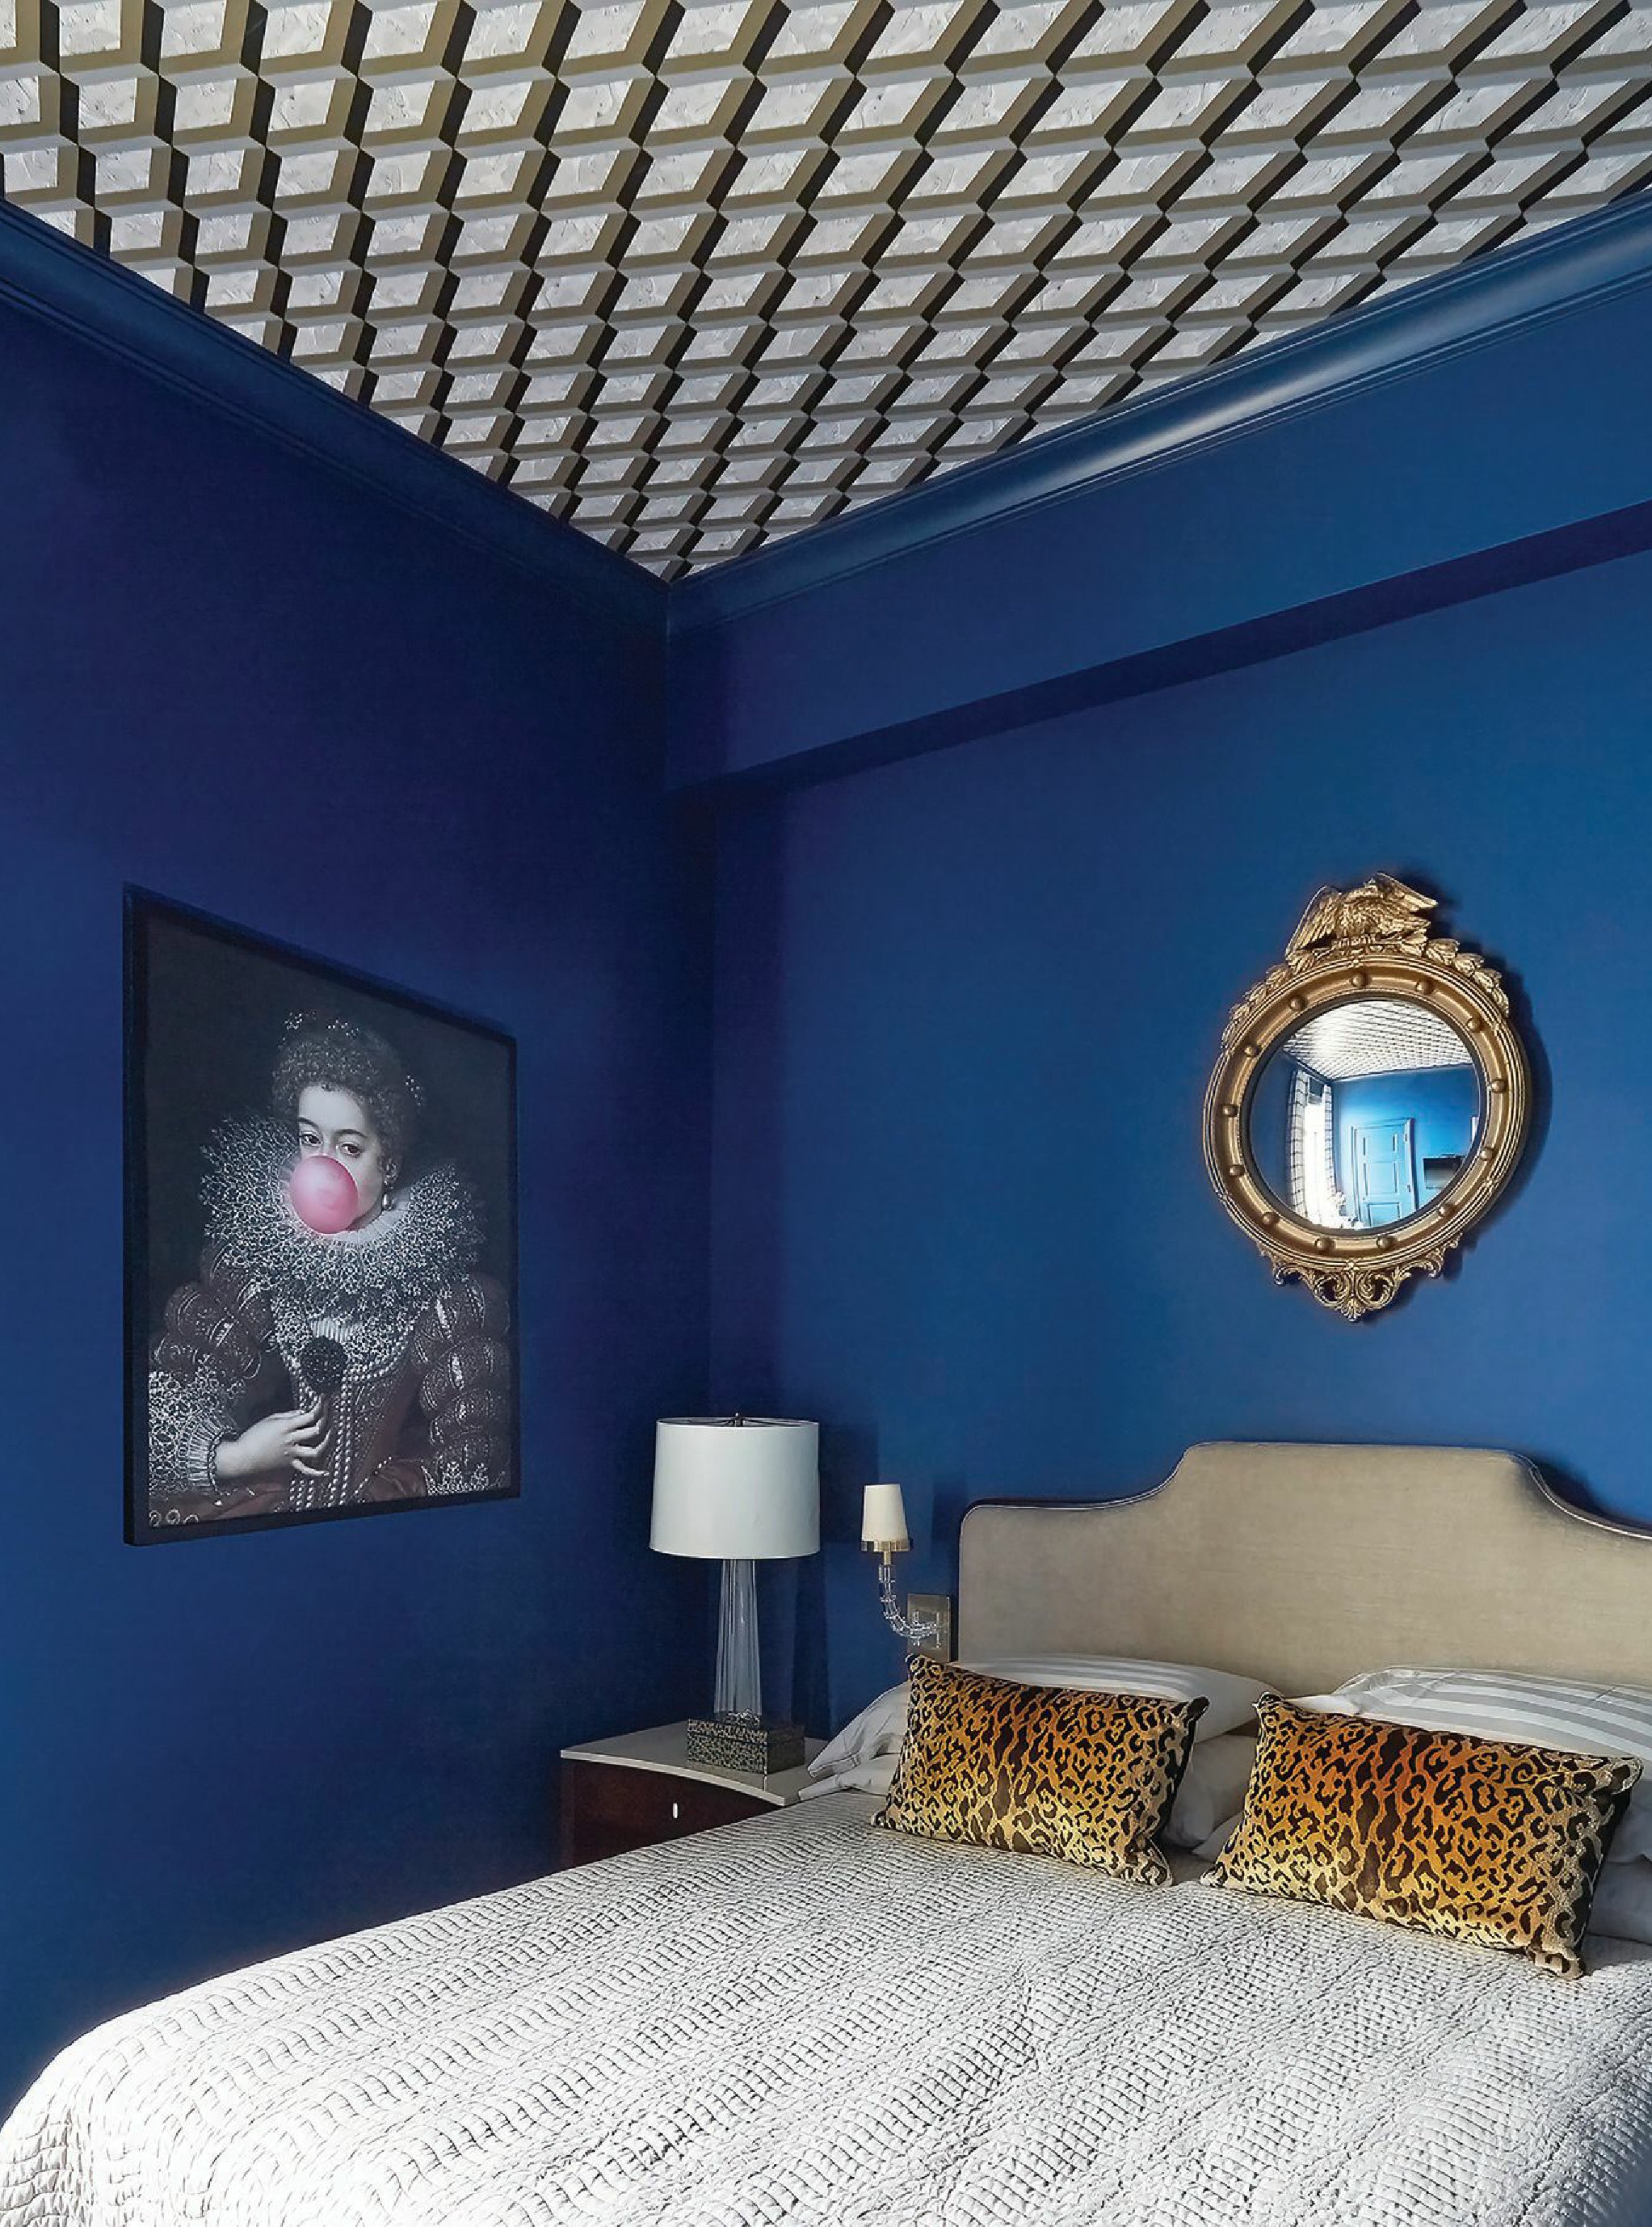 Queen of Color, indeed: Designer Jasmin Reese goes for the bold with walls in
Champion Cobalt by Benjamin Moore, an Osborne & Little wallcovering on the ceiling and a striking antique mirror in this Lincoln Park abode. PHOTO BY MICHAEL ALAN KASKEL